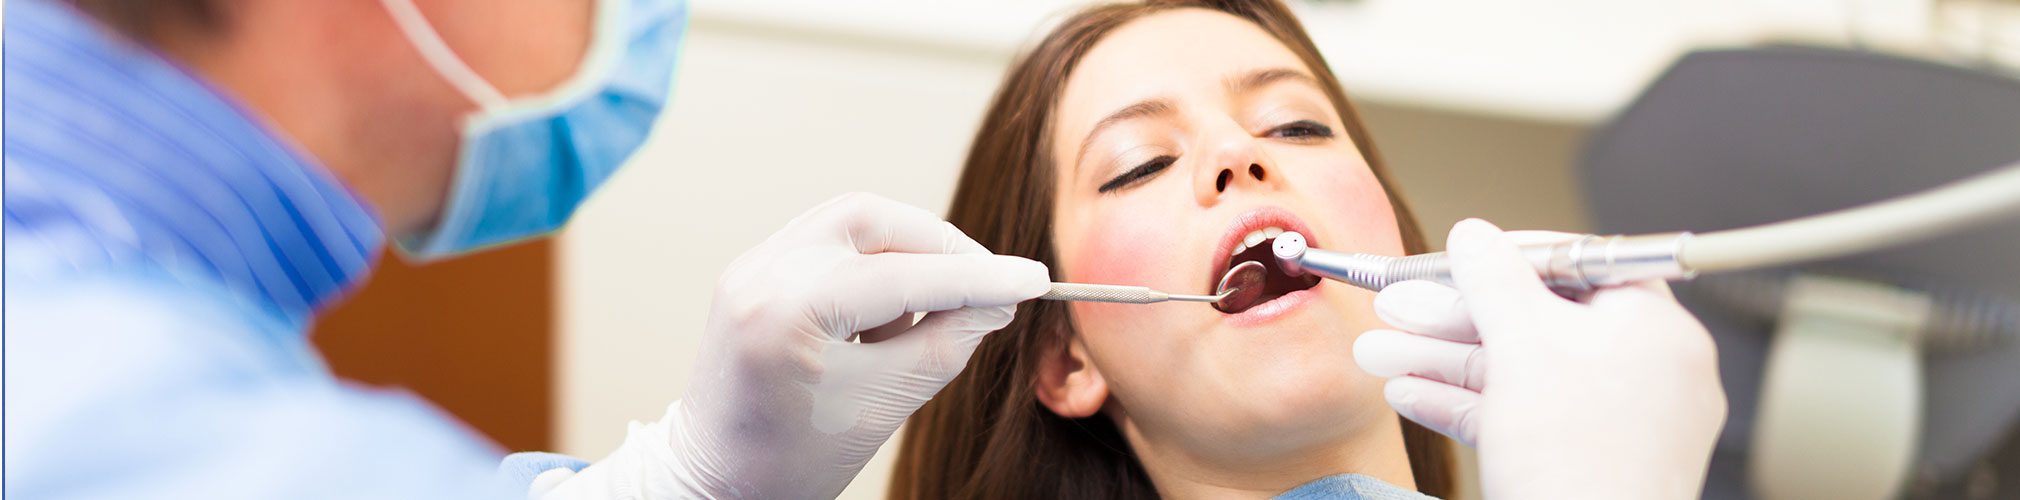 Female getting her teeth polished during a dental exam | Robson Family Dentistry in Bellefontaine, OH